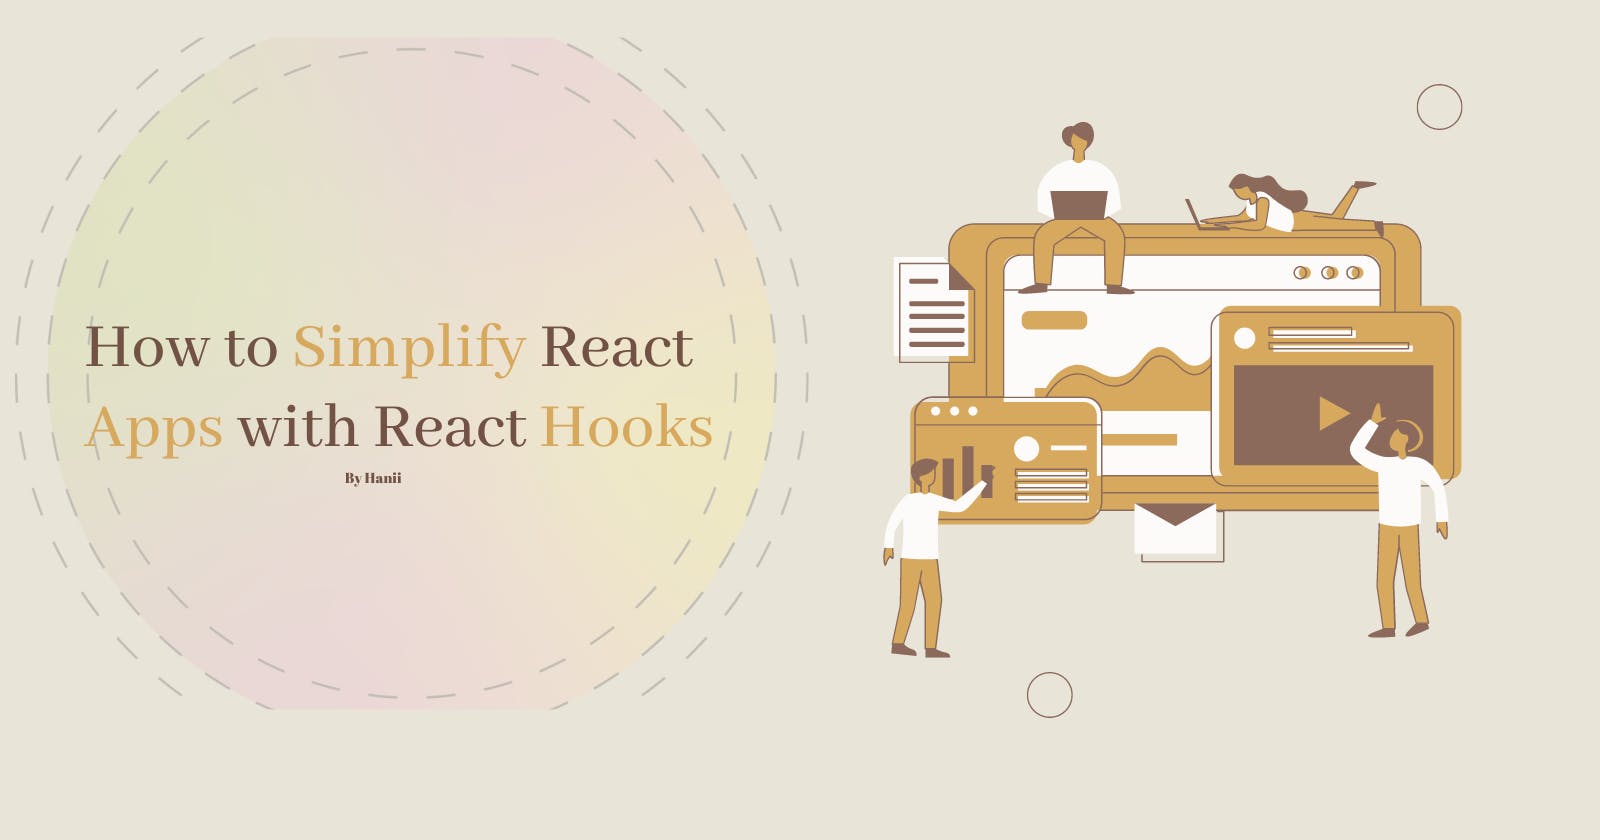 How to Simplify React Apps with React Hooks